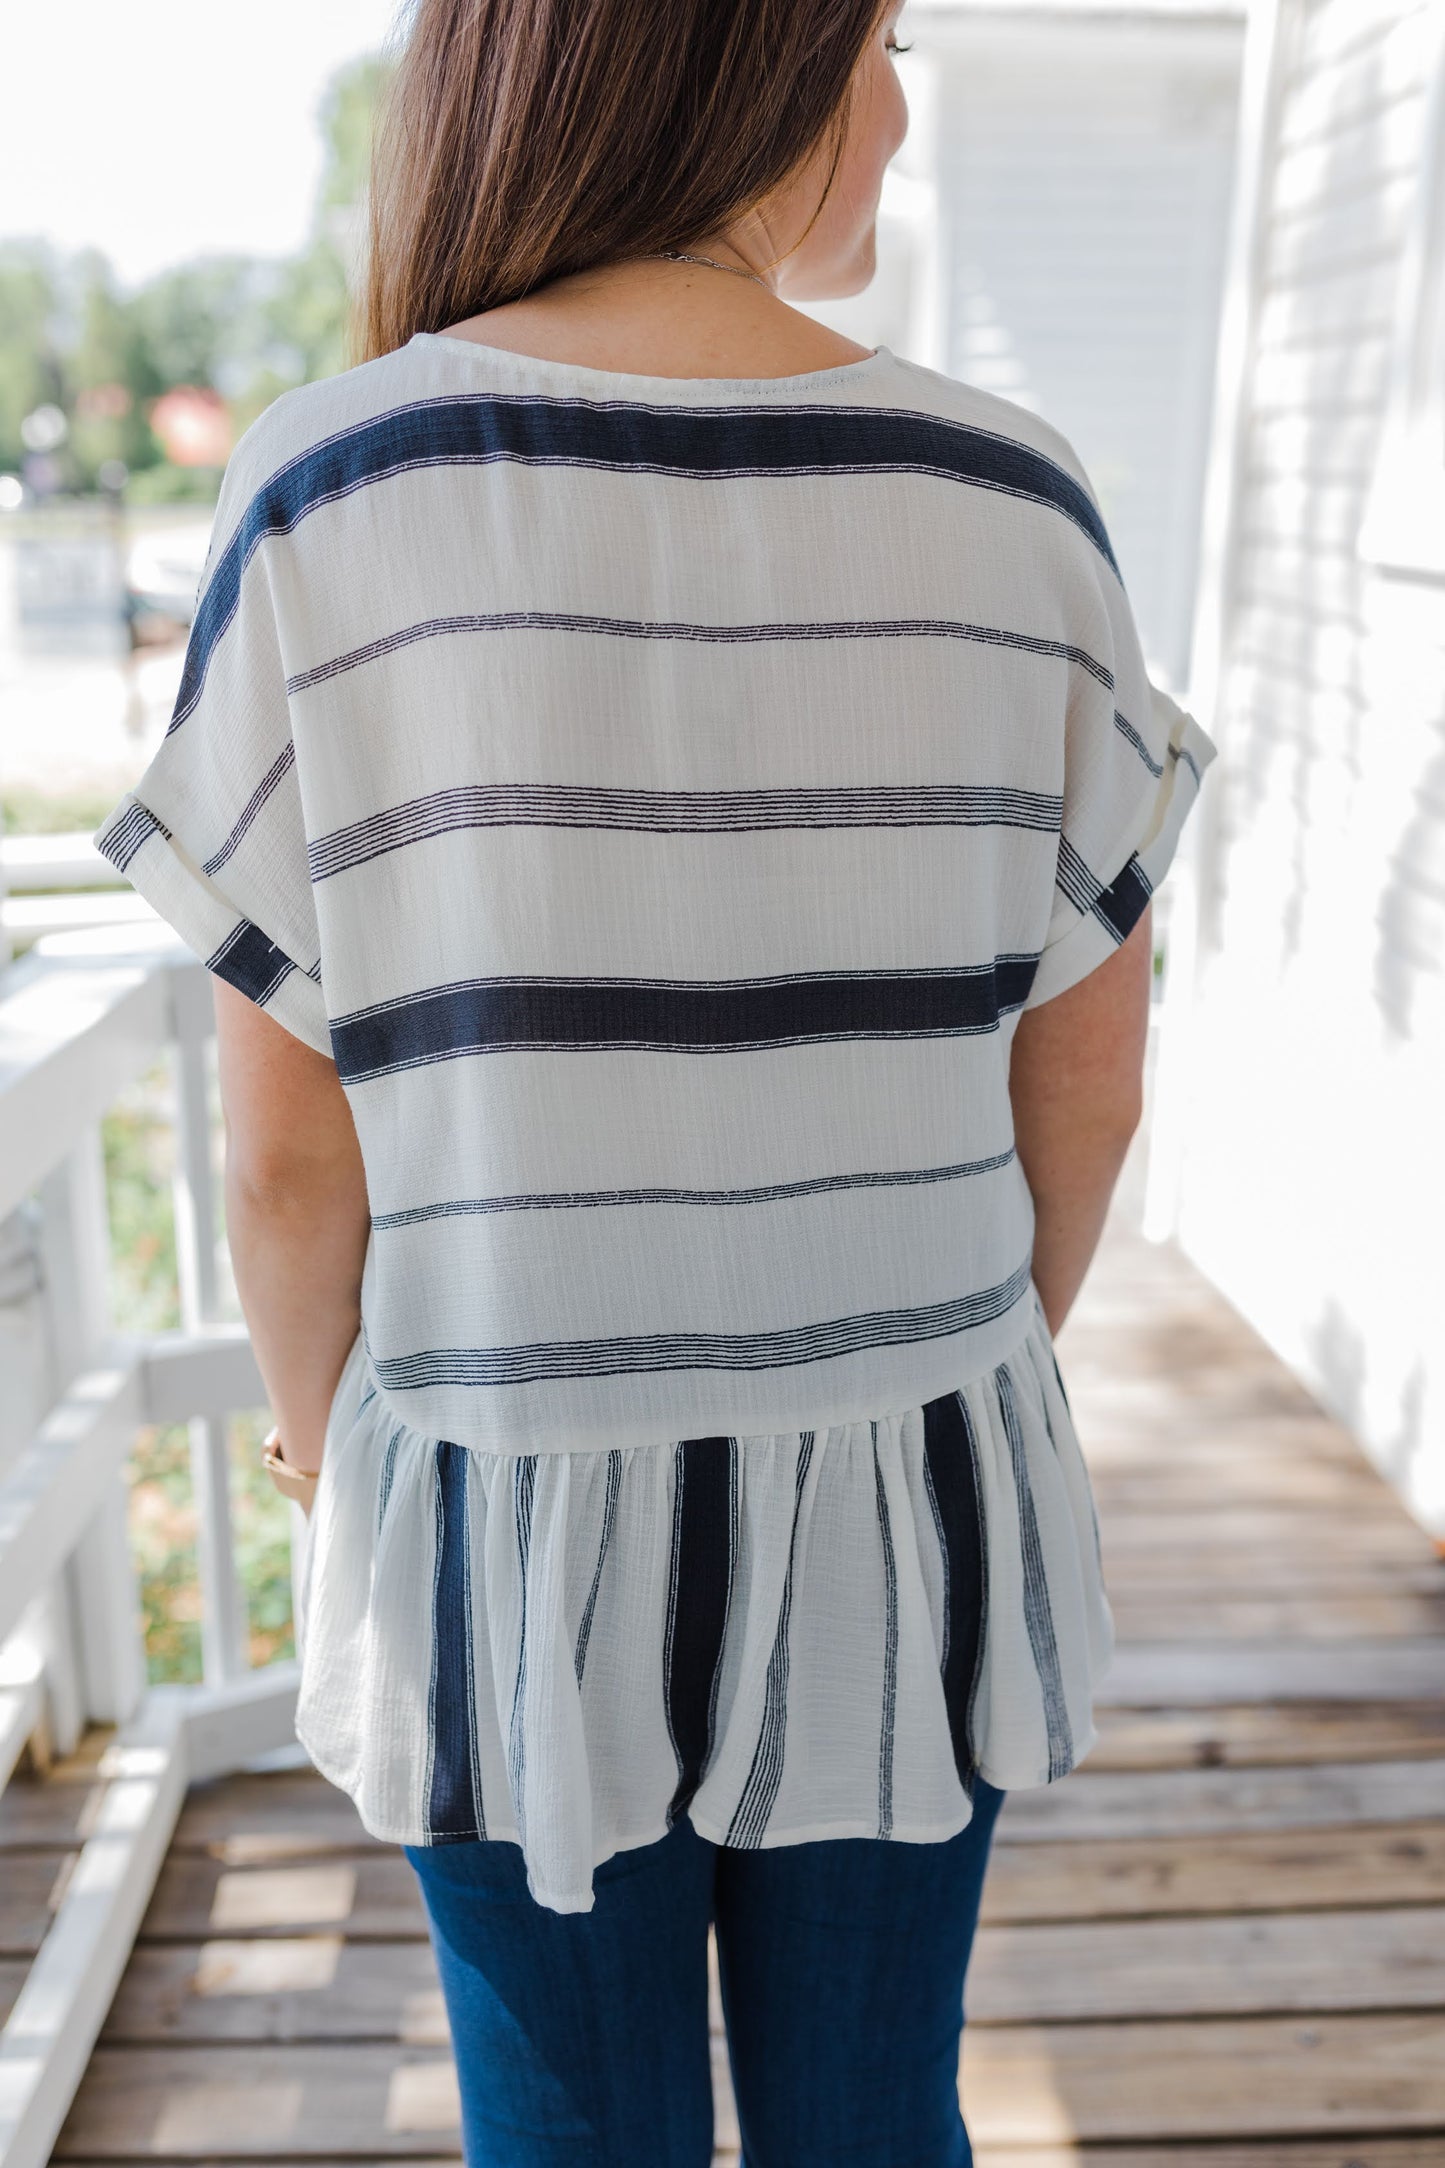 Bringing By the Navy Stripes Top